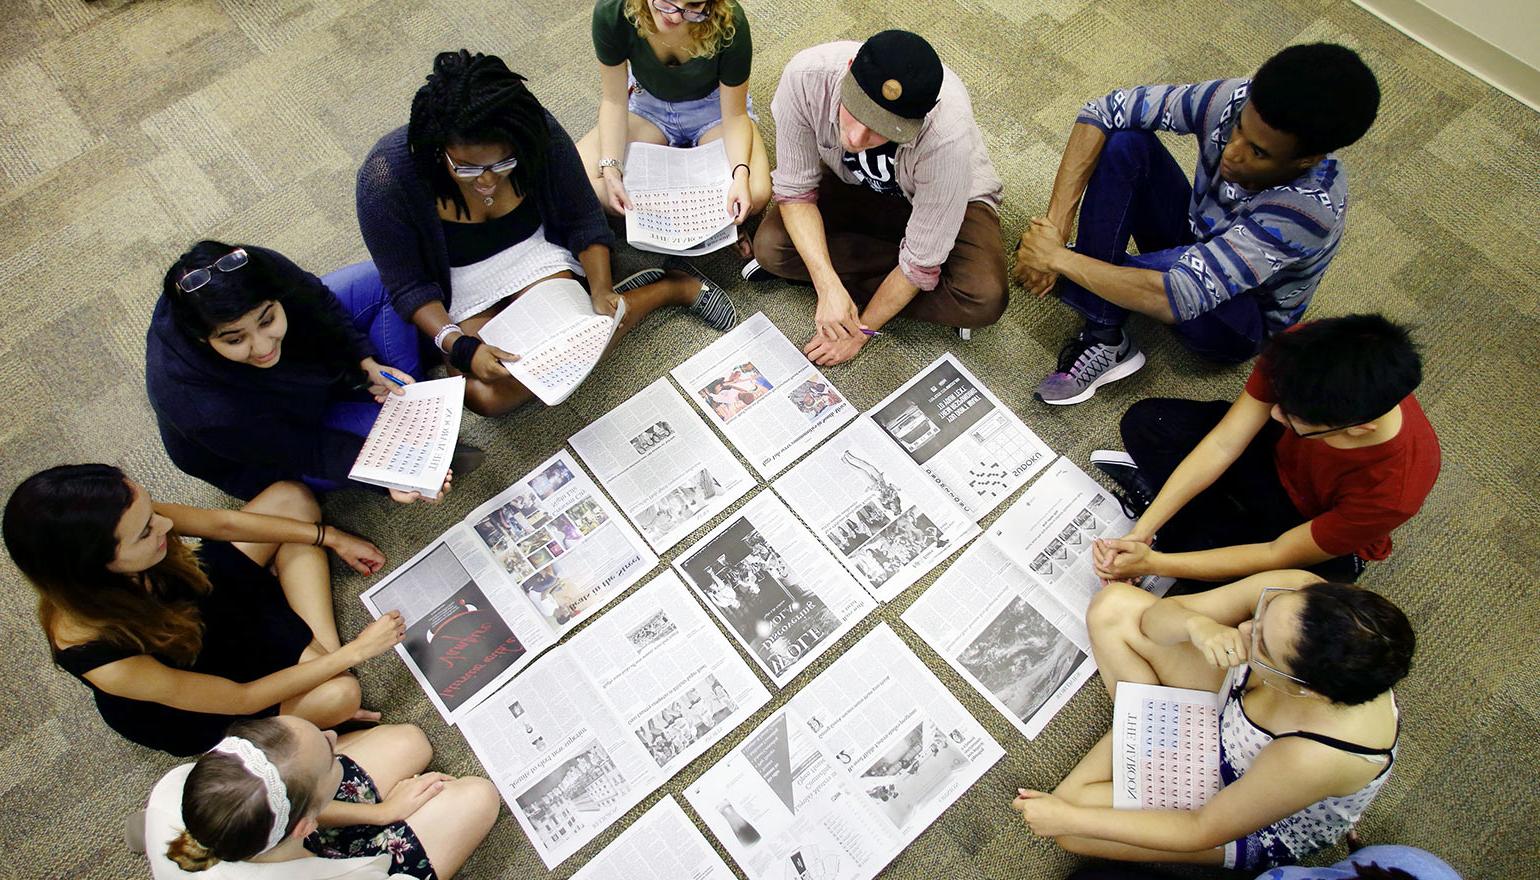 Students surrounding print outs of newspaper draft